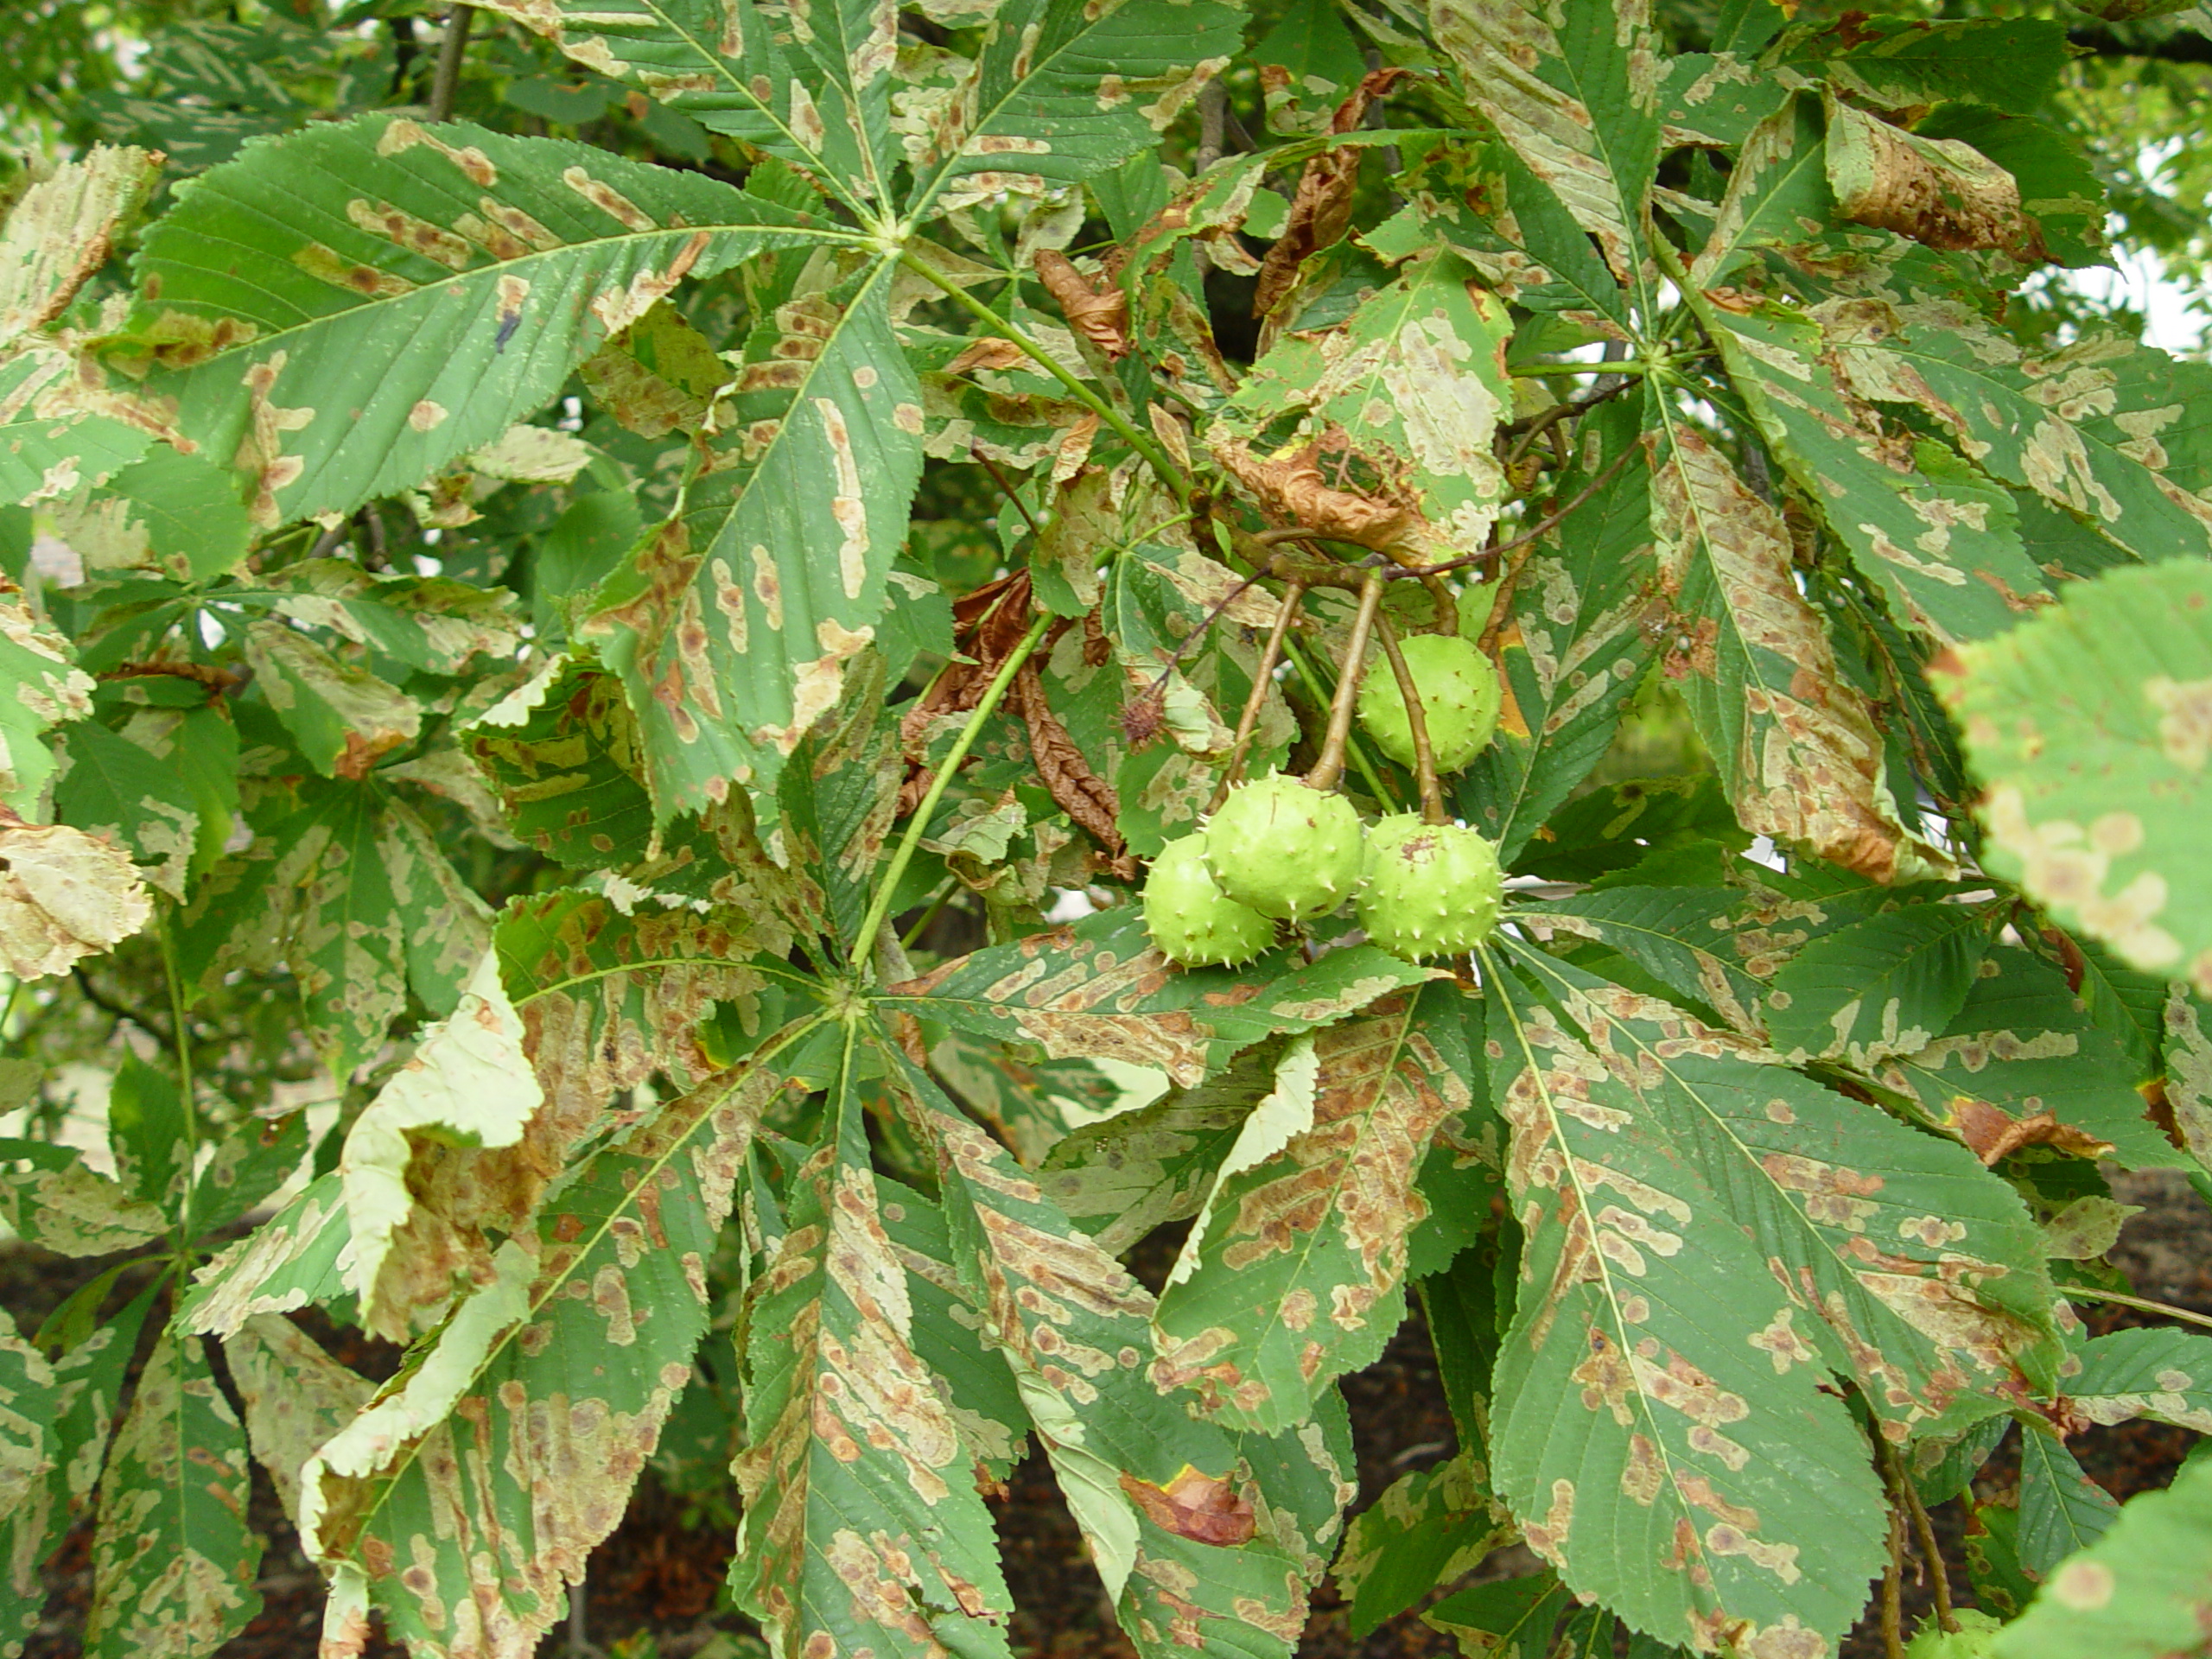 How to control horse chestnut leaf miner